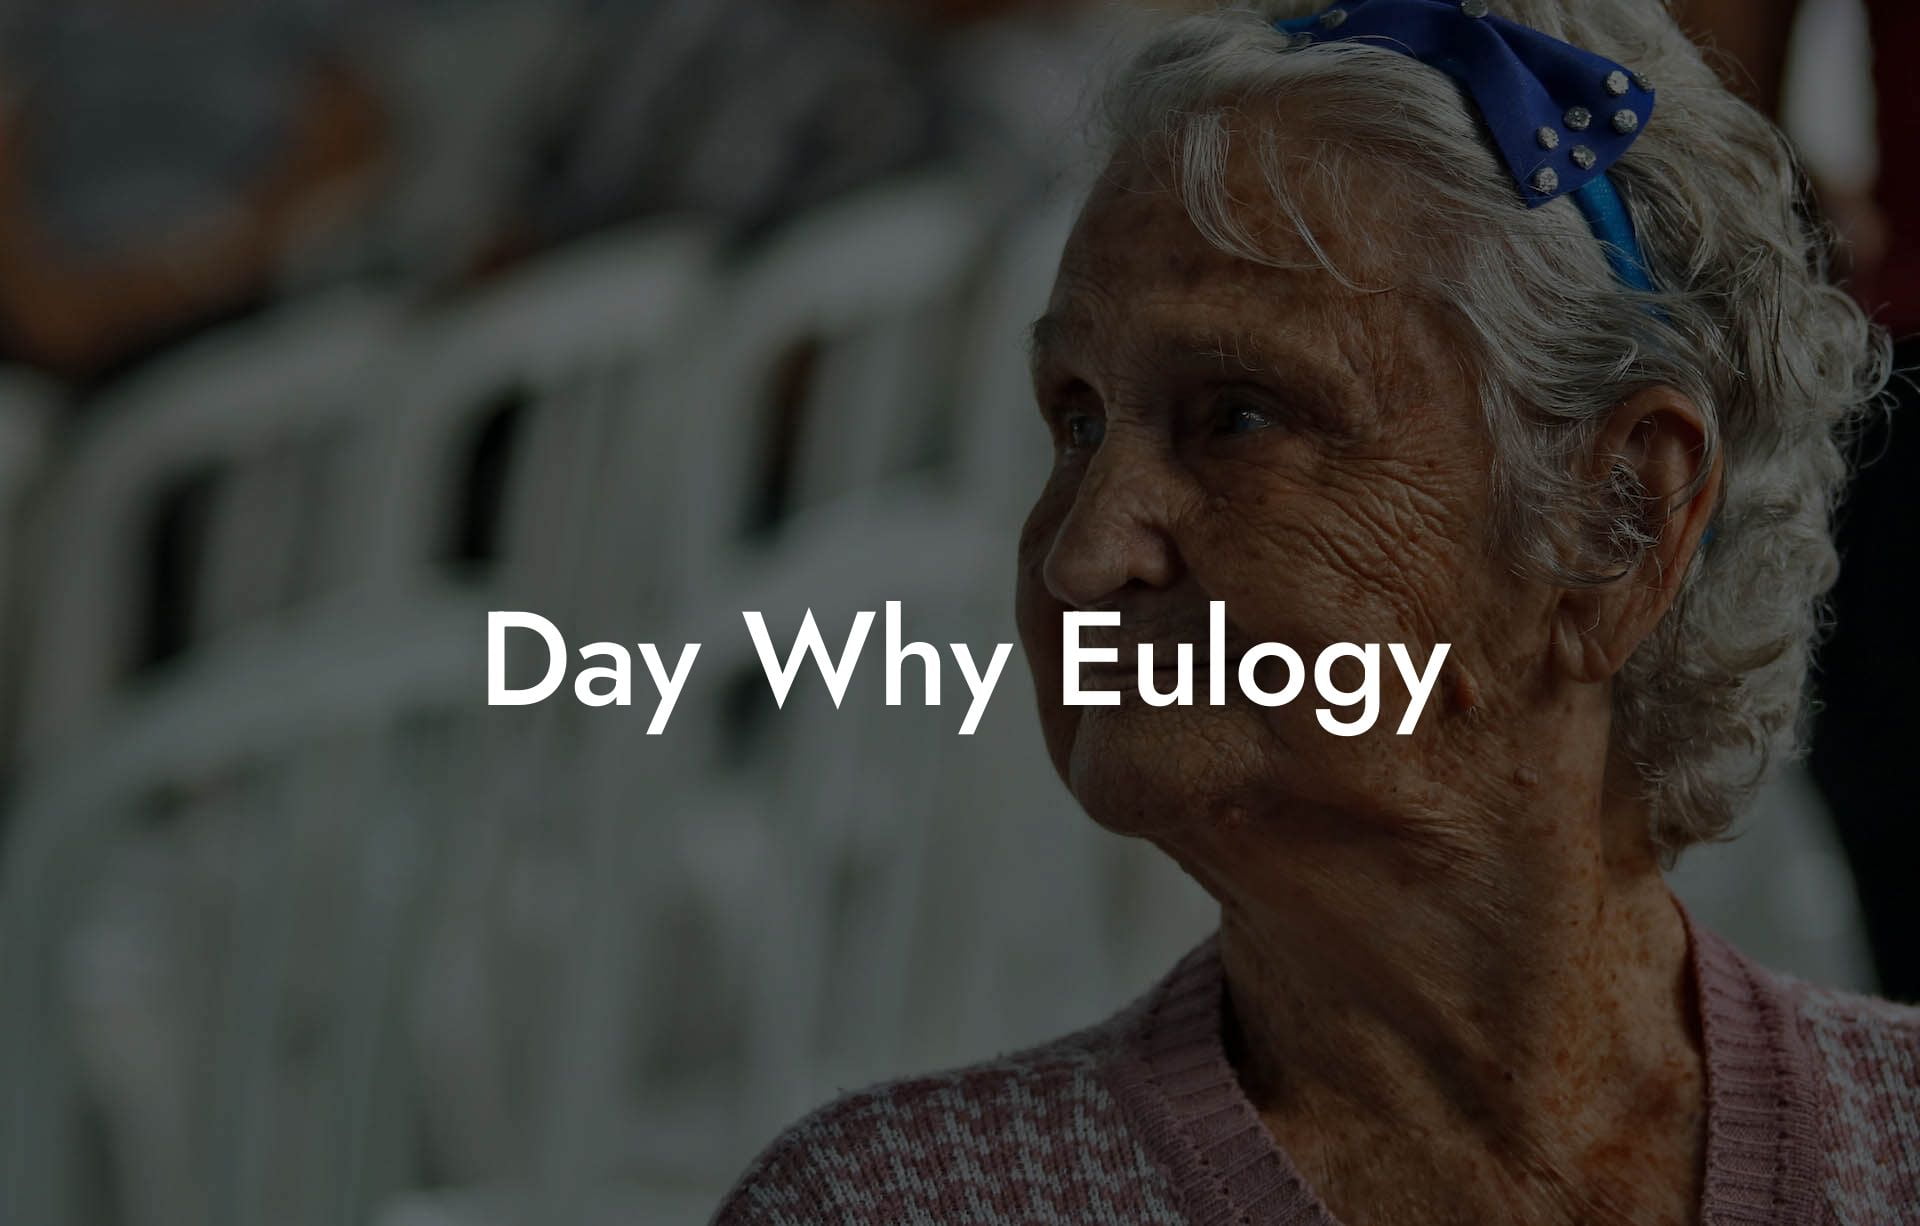 Day Why Eulogy